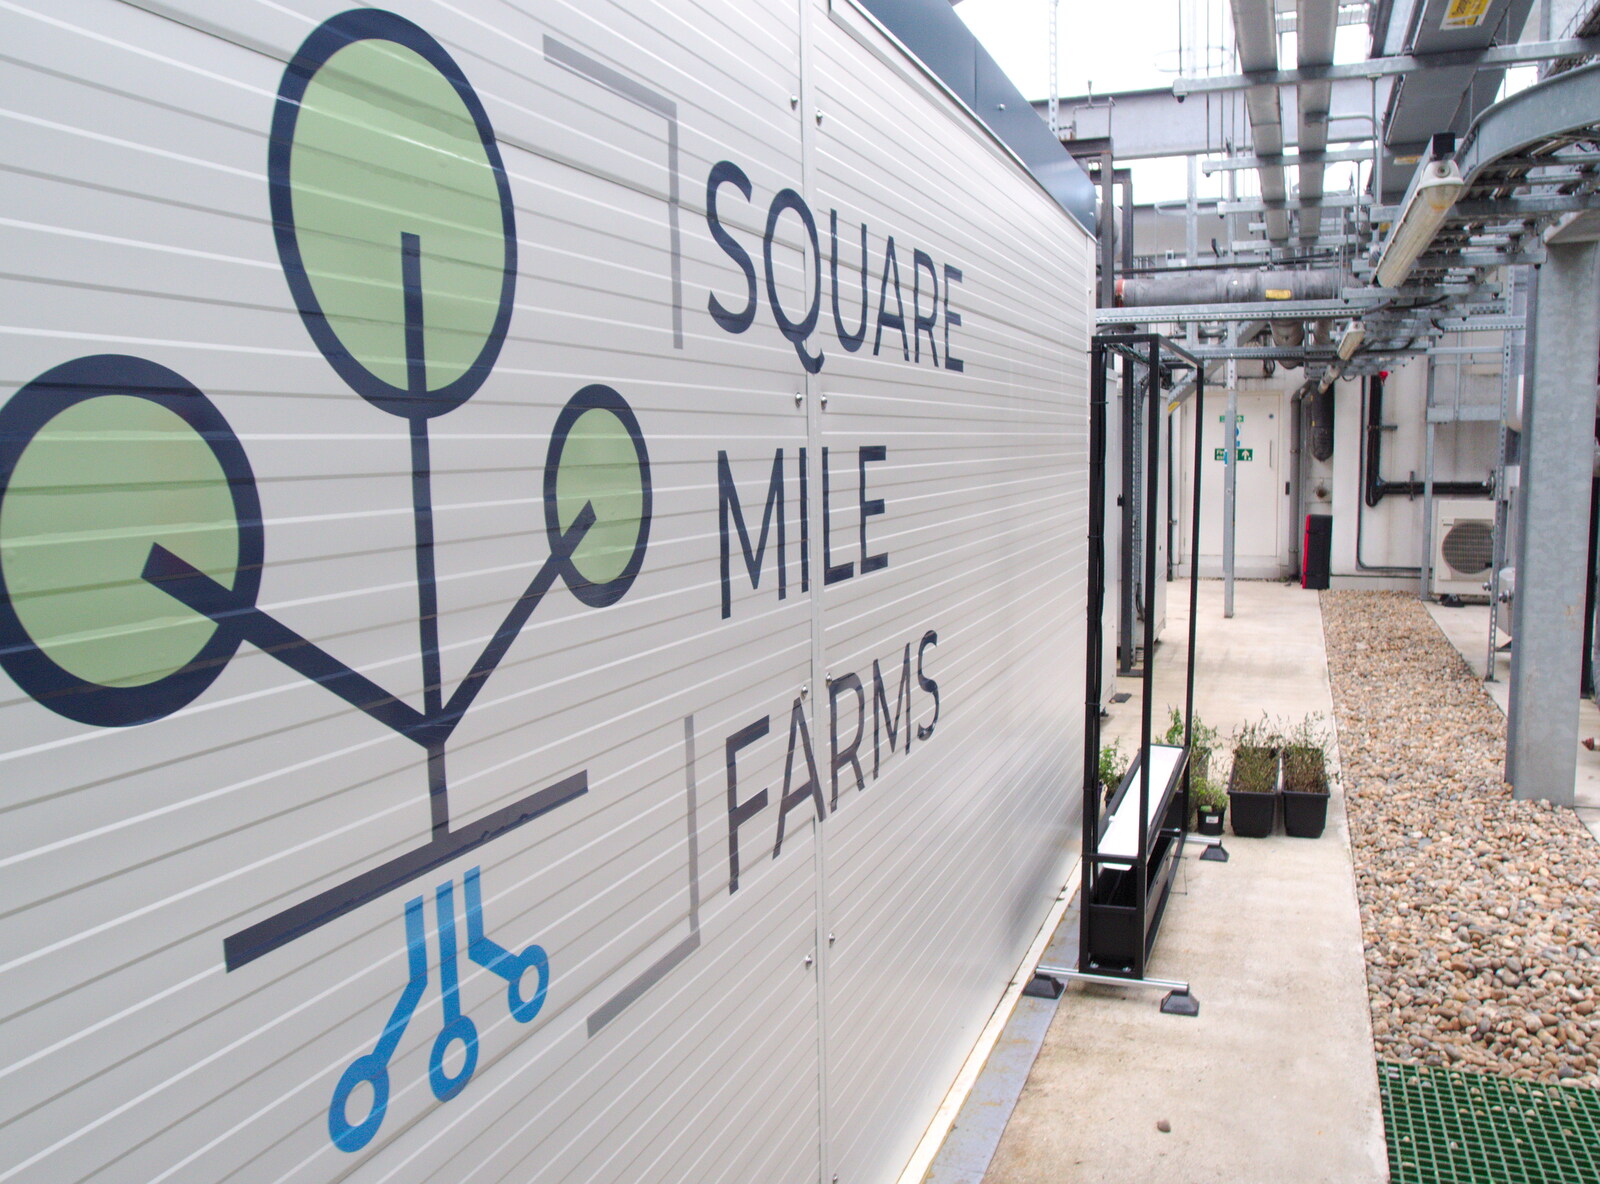 Square Mile Farms, on the roof from Up on the Roof: a Hydroponic City Farm, Kingdom Street, Paddington - 3rd September 2019